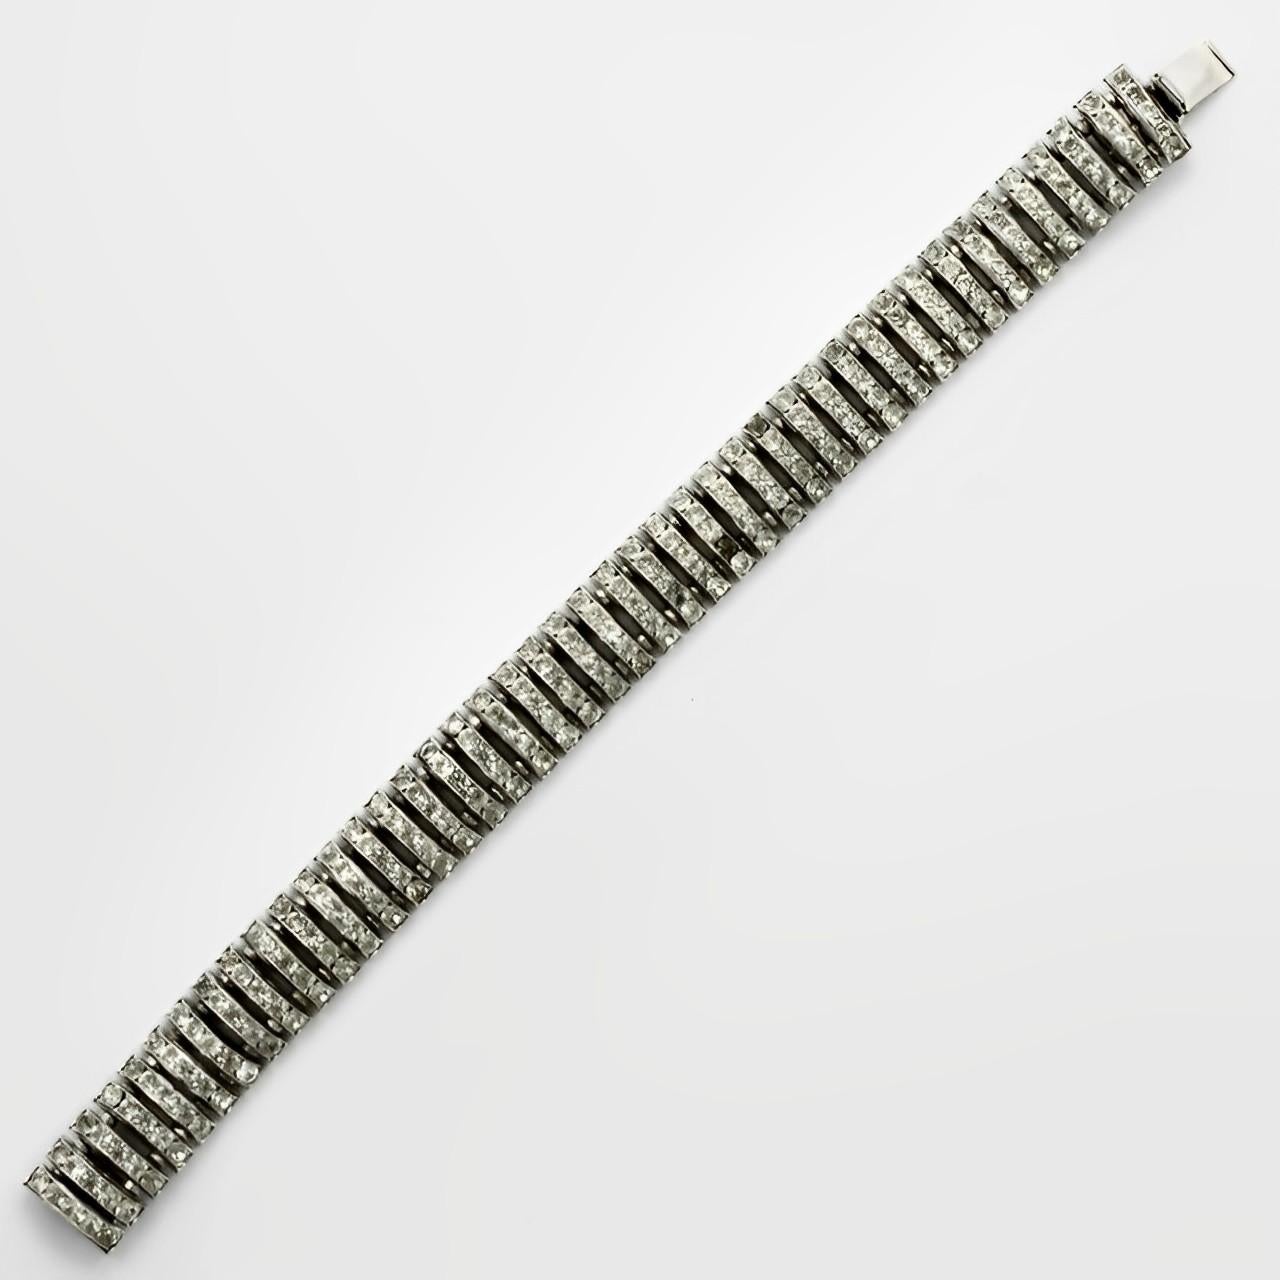 Wonderful Butler & Wilson silver tone link bracelet, featuring five rows of channel set crystals. The design is reminiscent of Art Deco 1930s jewellery made in Germany by companies such as Schreiber & Hiller. Measuring length 17.7 cm / 7 inches, by